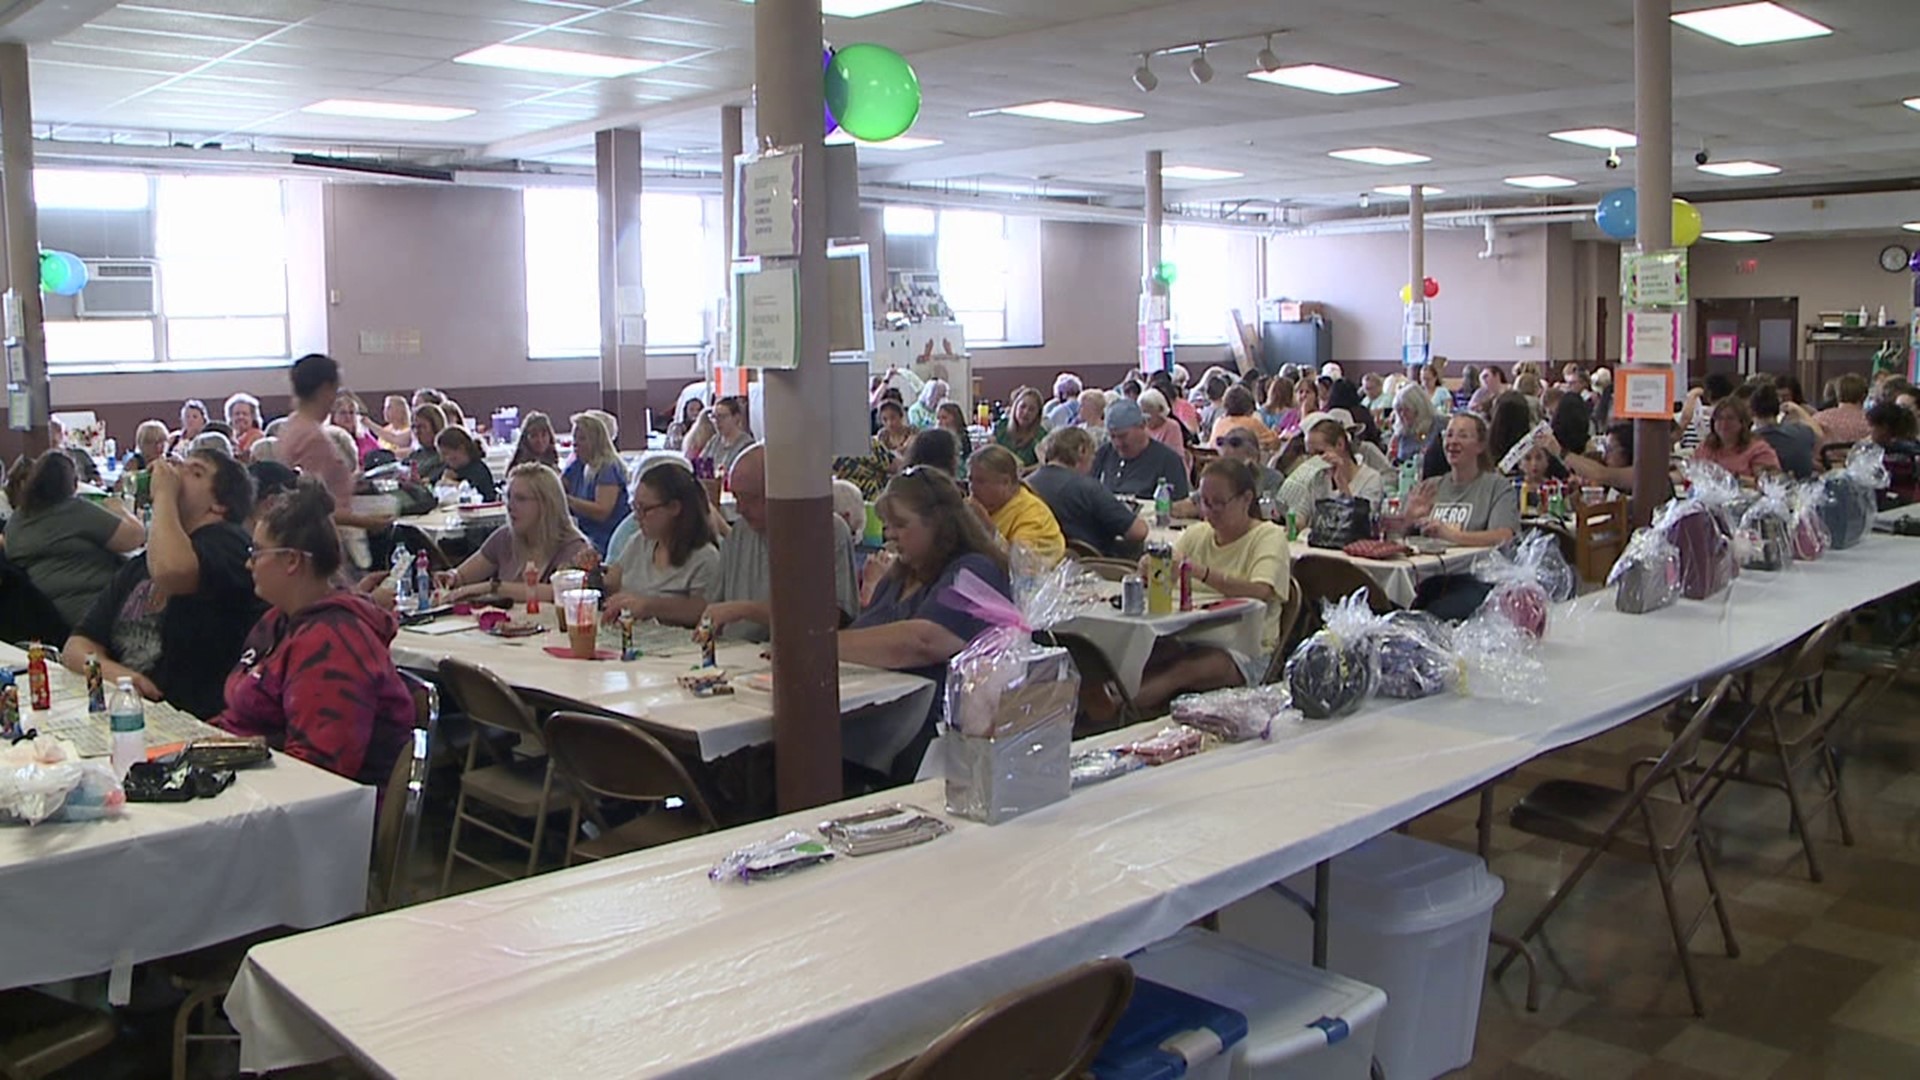 The event benefitting the Jonathan Grula Memorial Foundation was held in the Diamond city Sunday afternoon.